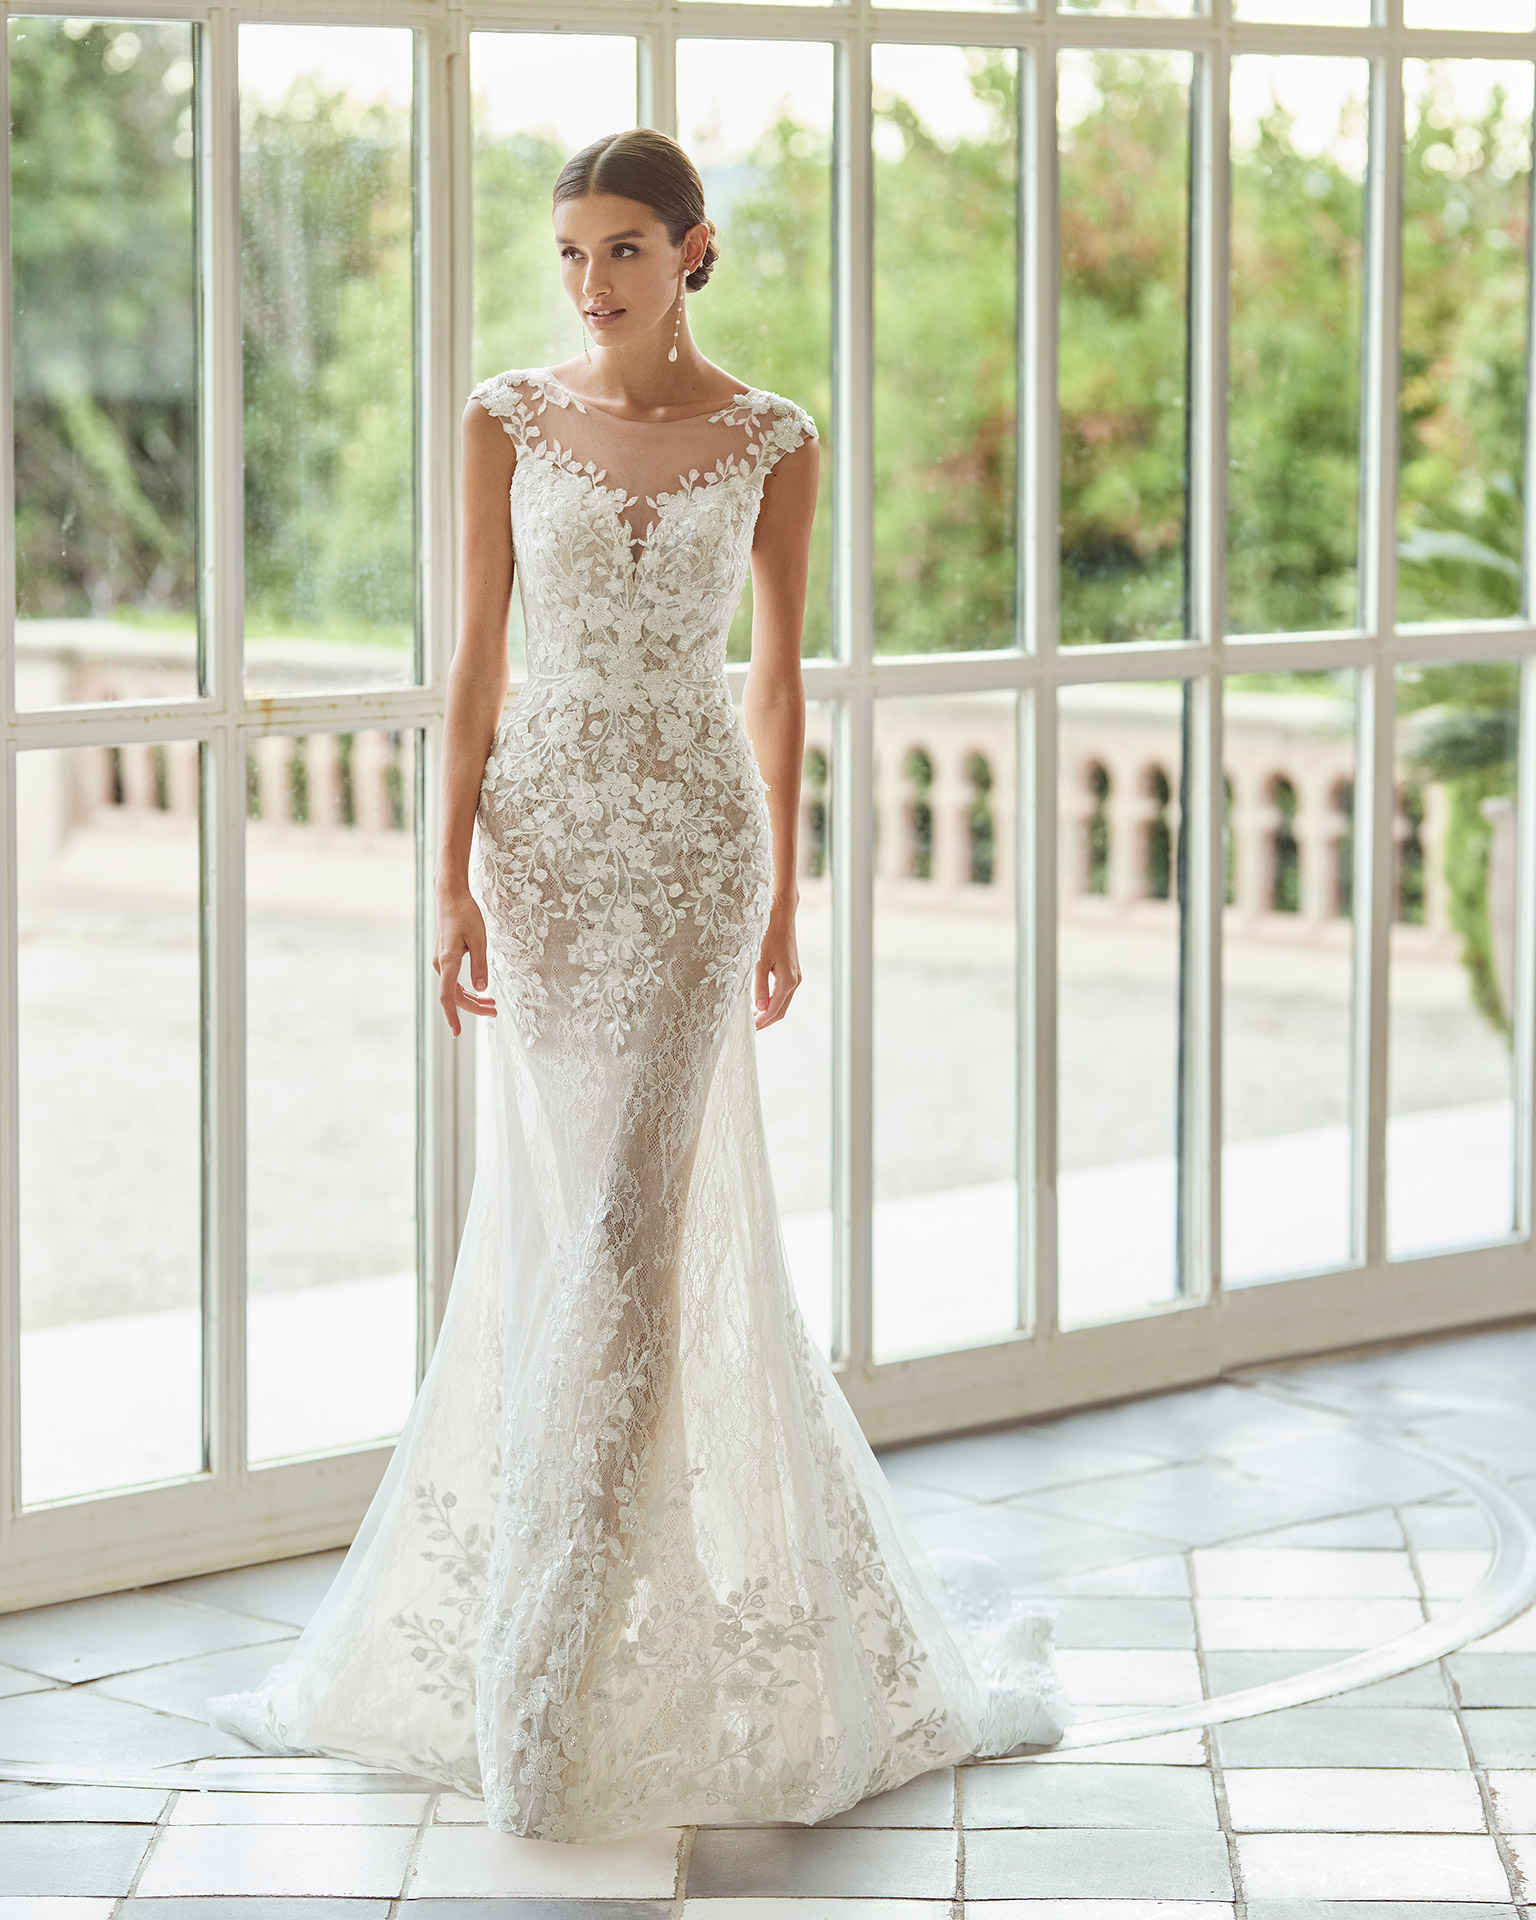 Two-piece mermaid-style wedding dress, with a voluminous overskirt; with an illusion neckline, and a button-up tattoo-effect back. Dreamy Luna Studio outfit made of tulle and lace with beadwork. LUNA_NOVIAS.